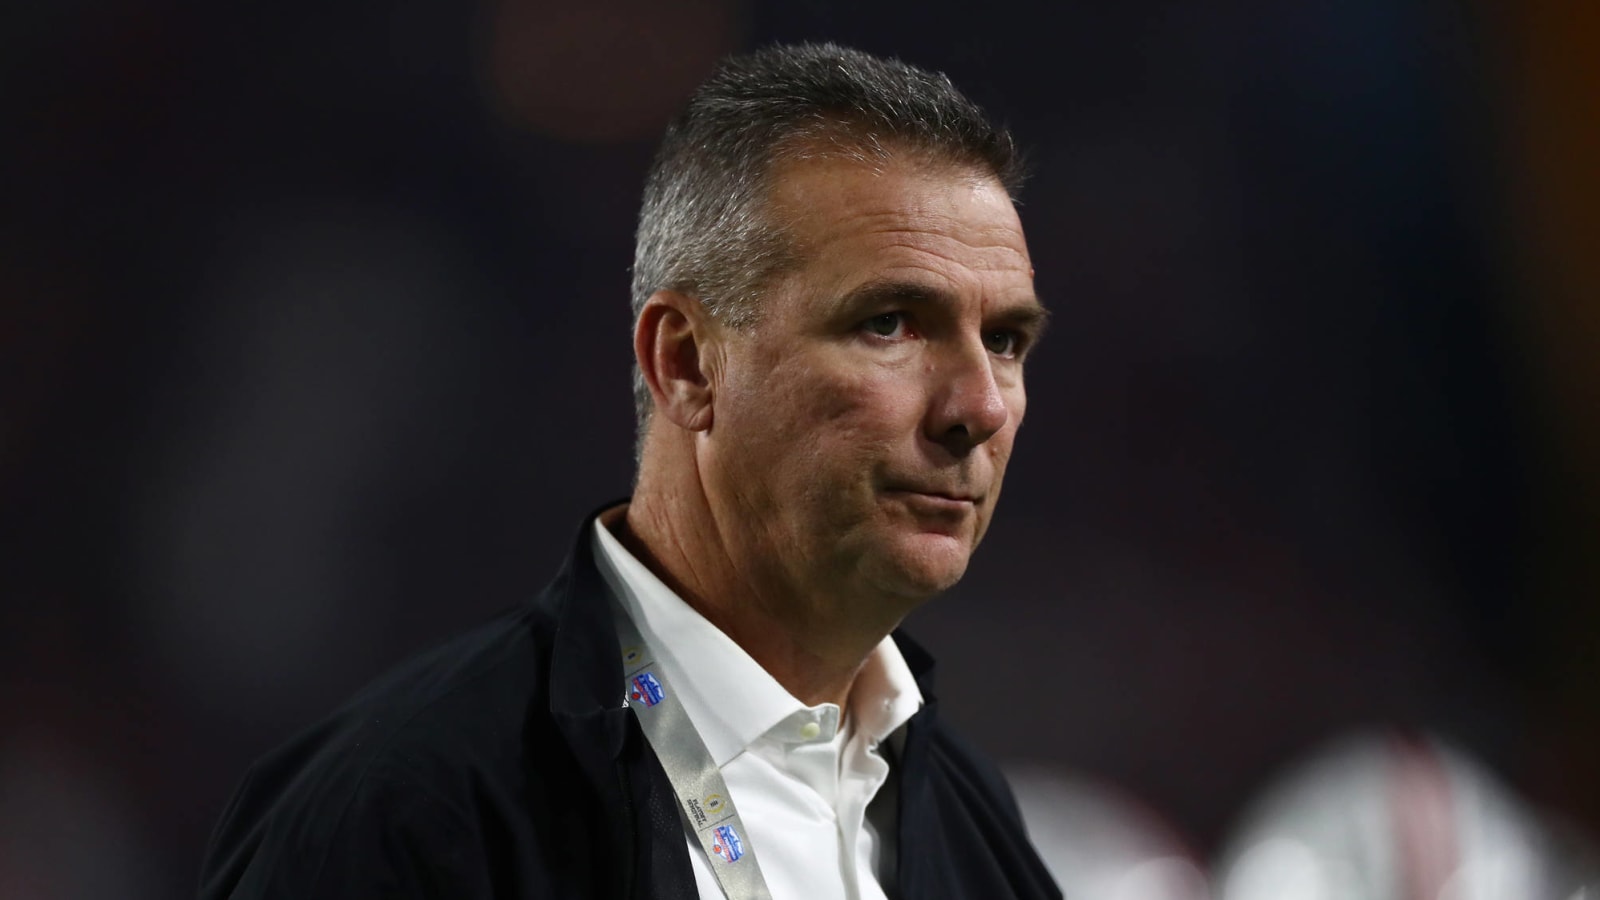 Urban Meyer goes viral for message about fixing struggling teams